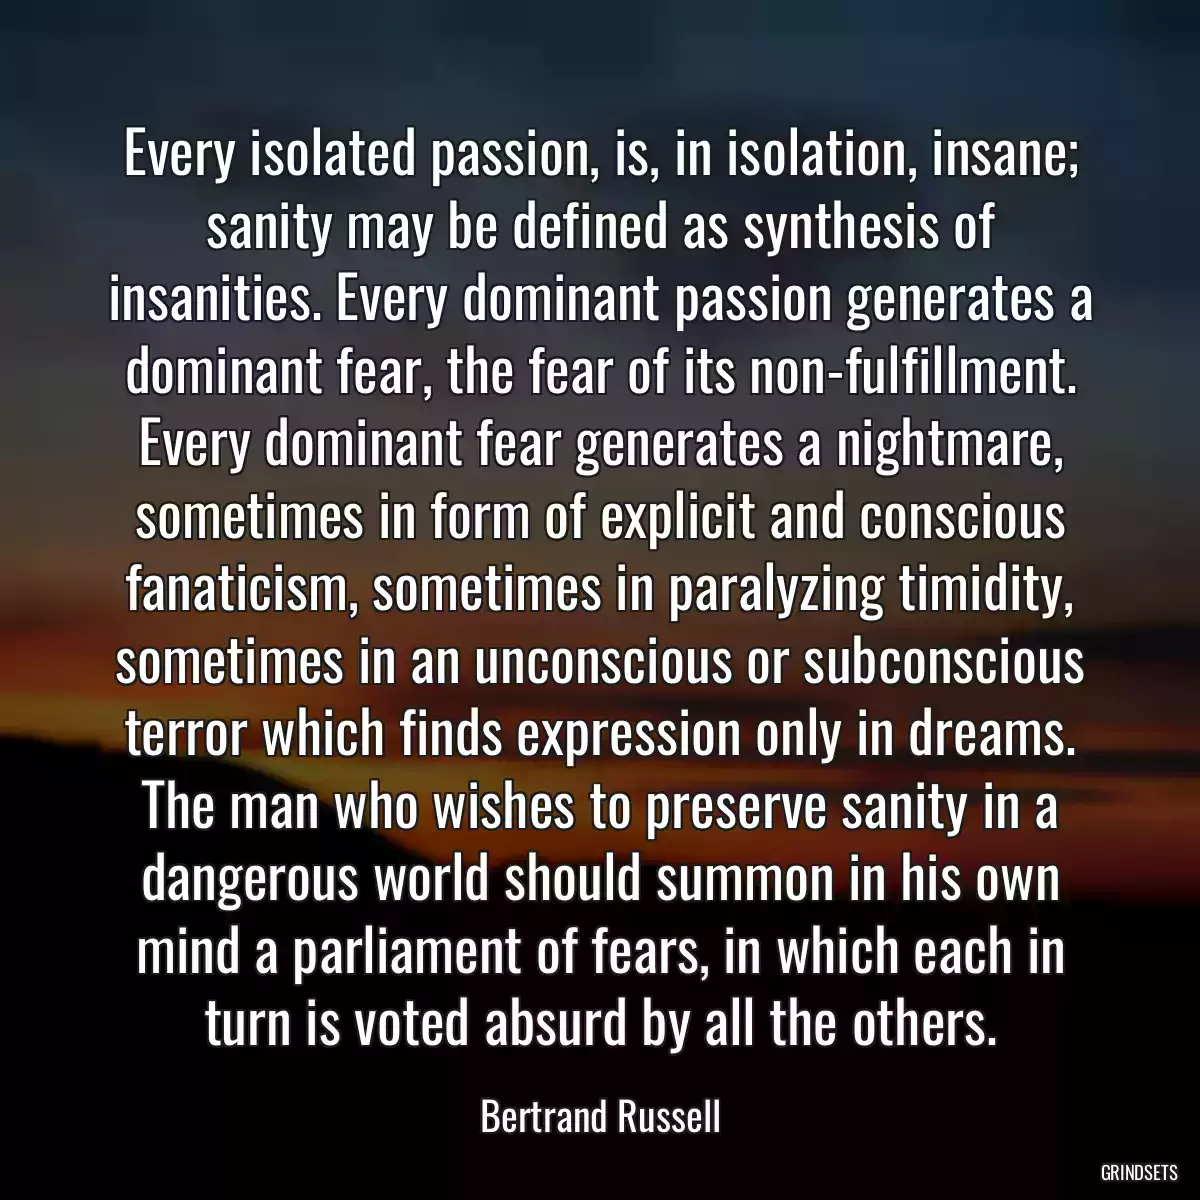 Every isolated passion, is, in isolation, insane; sanity may be defined as synthesis of insanities. Every dominant passion generates a dominant fear, the fear of its non-fulfillment. Every dominant fear generates a nightmare, sometimes in form of explicit and conscious fanaticism, sometimes in paralyzing timidity, sometimes in an unconscious or subconscious terror which finds expression only in dreams. The man who wishes to preserve sanity in a dangerous world should summon in his own mind a parliament of fears, in which each in turn is voted absurd by all the others.